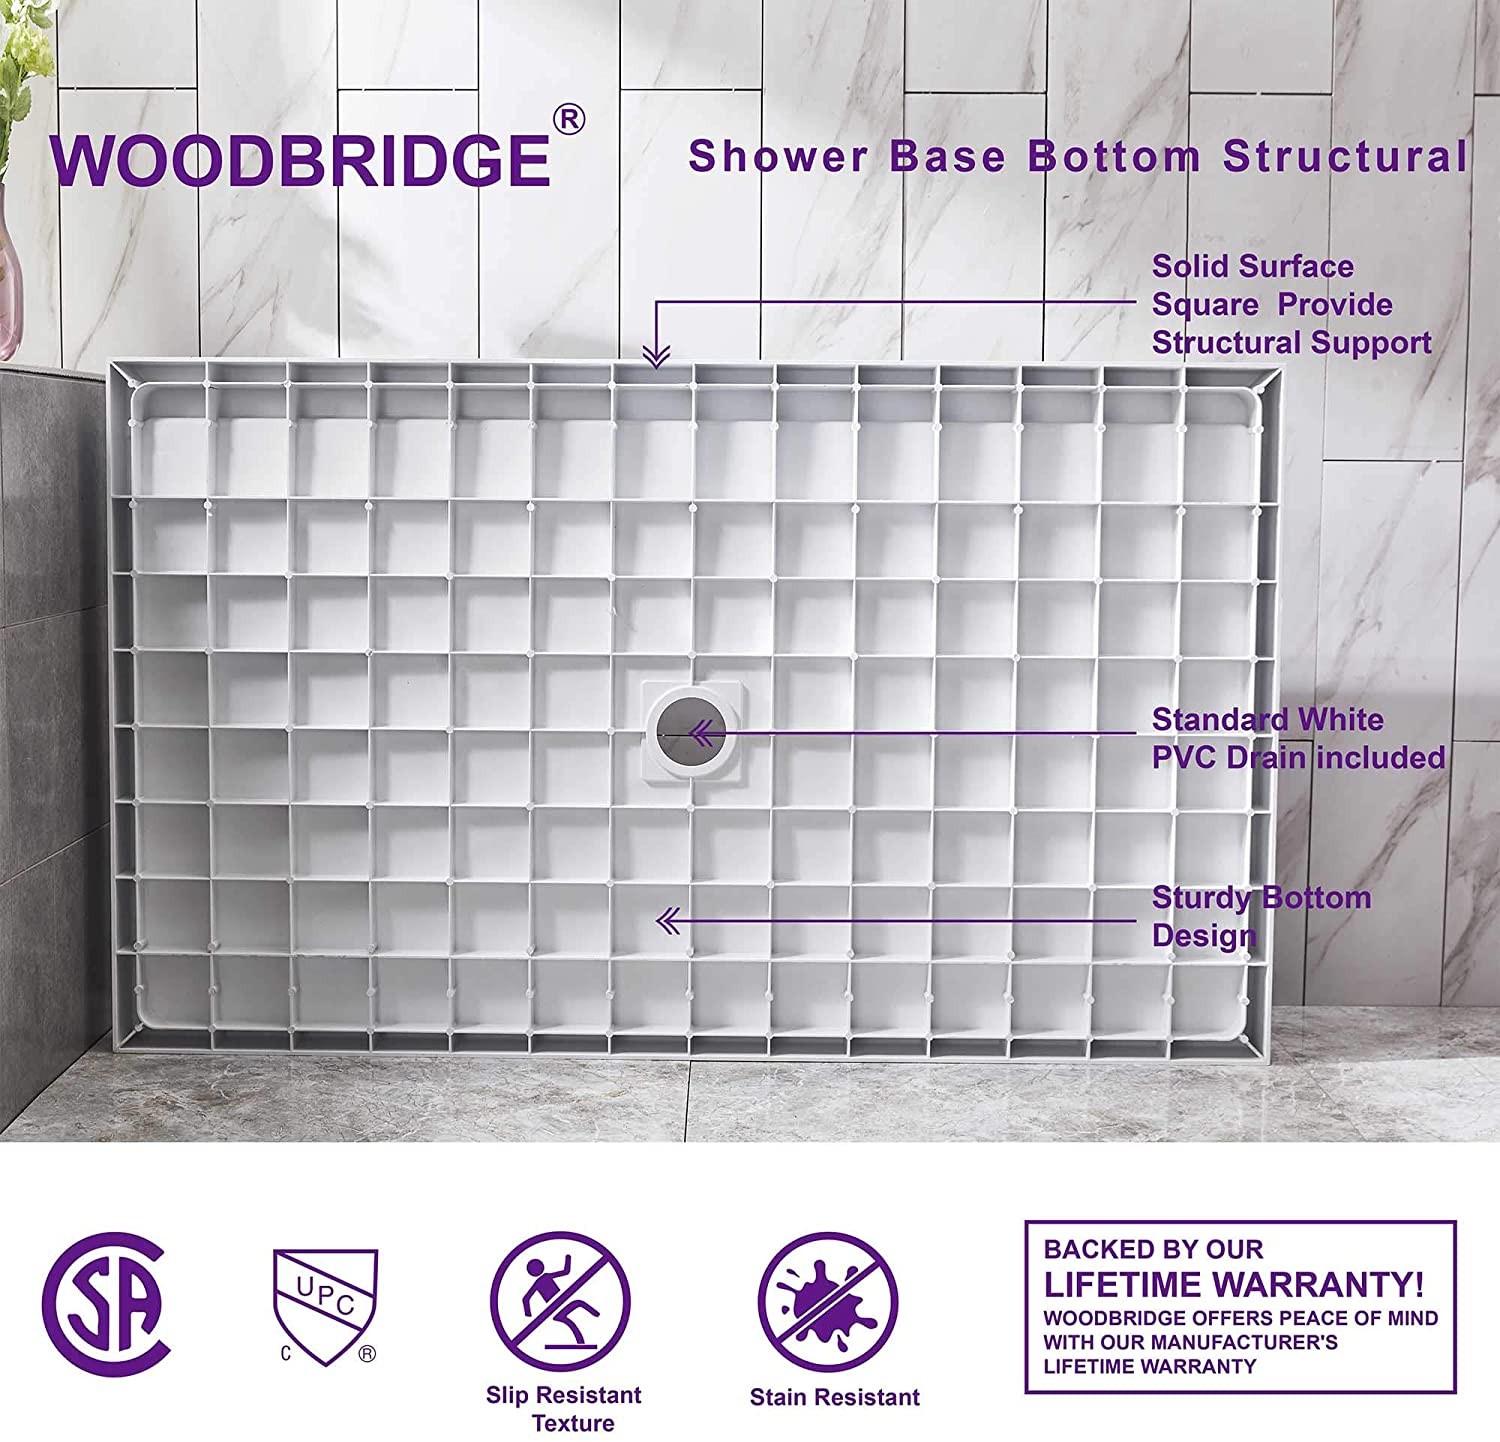  WOODBRIDGE SBR4836-1000C-ORB SolidSurface Shower Base with Recessed Trench Side Including Oil Rubbed Bronze Linear Cover, 48